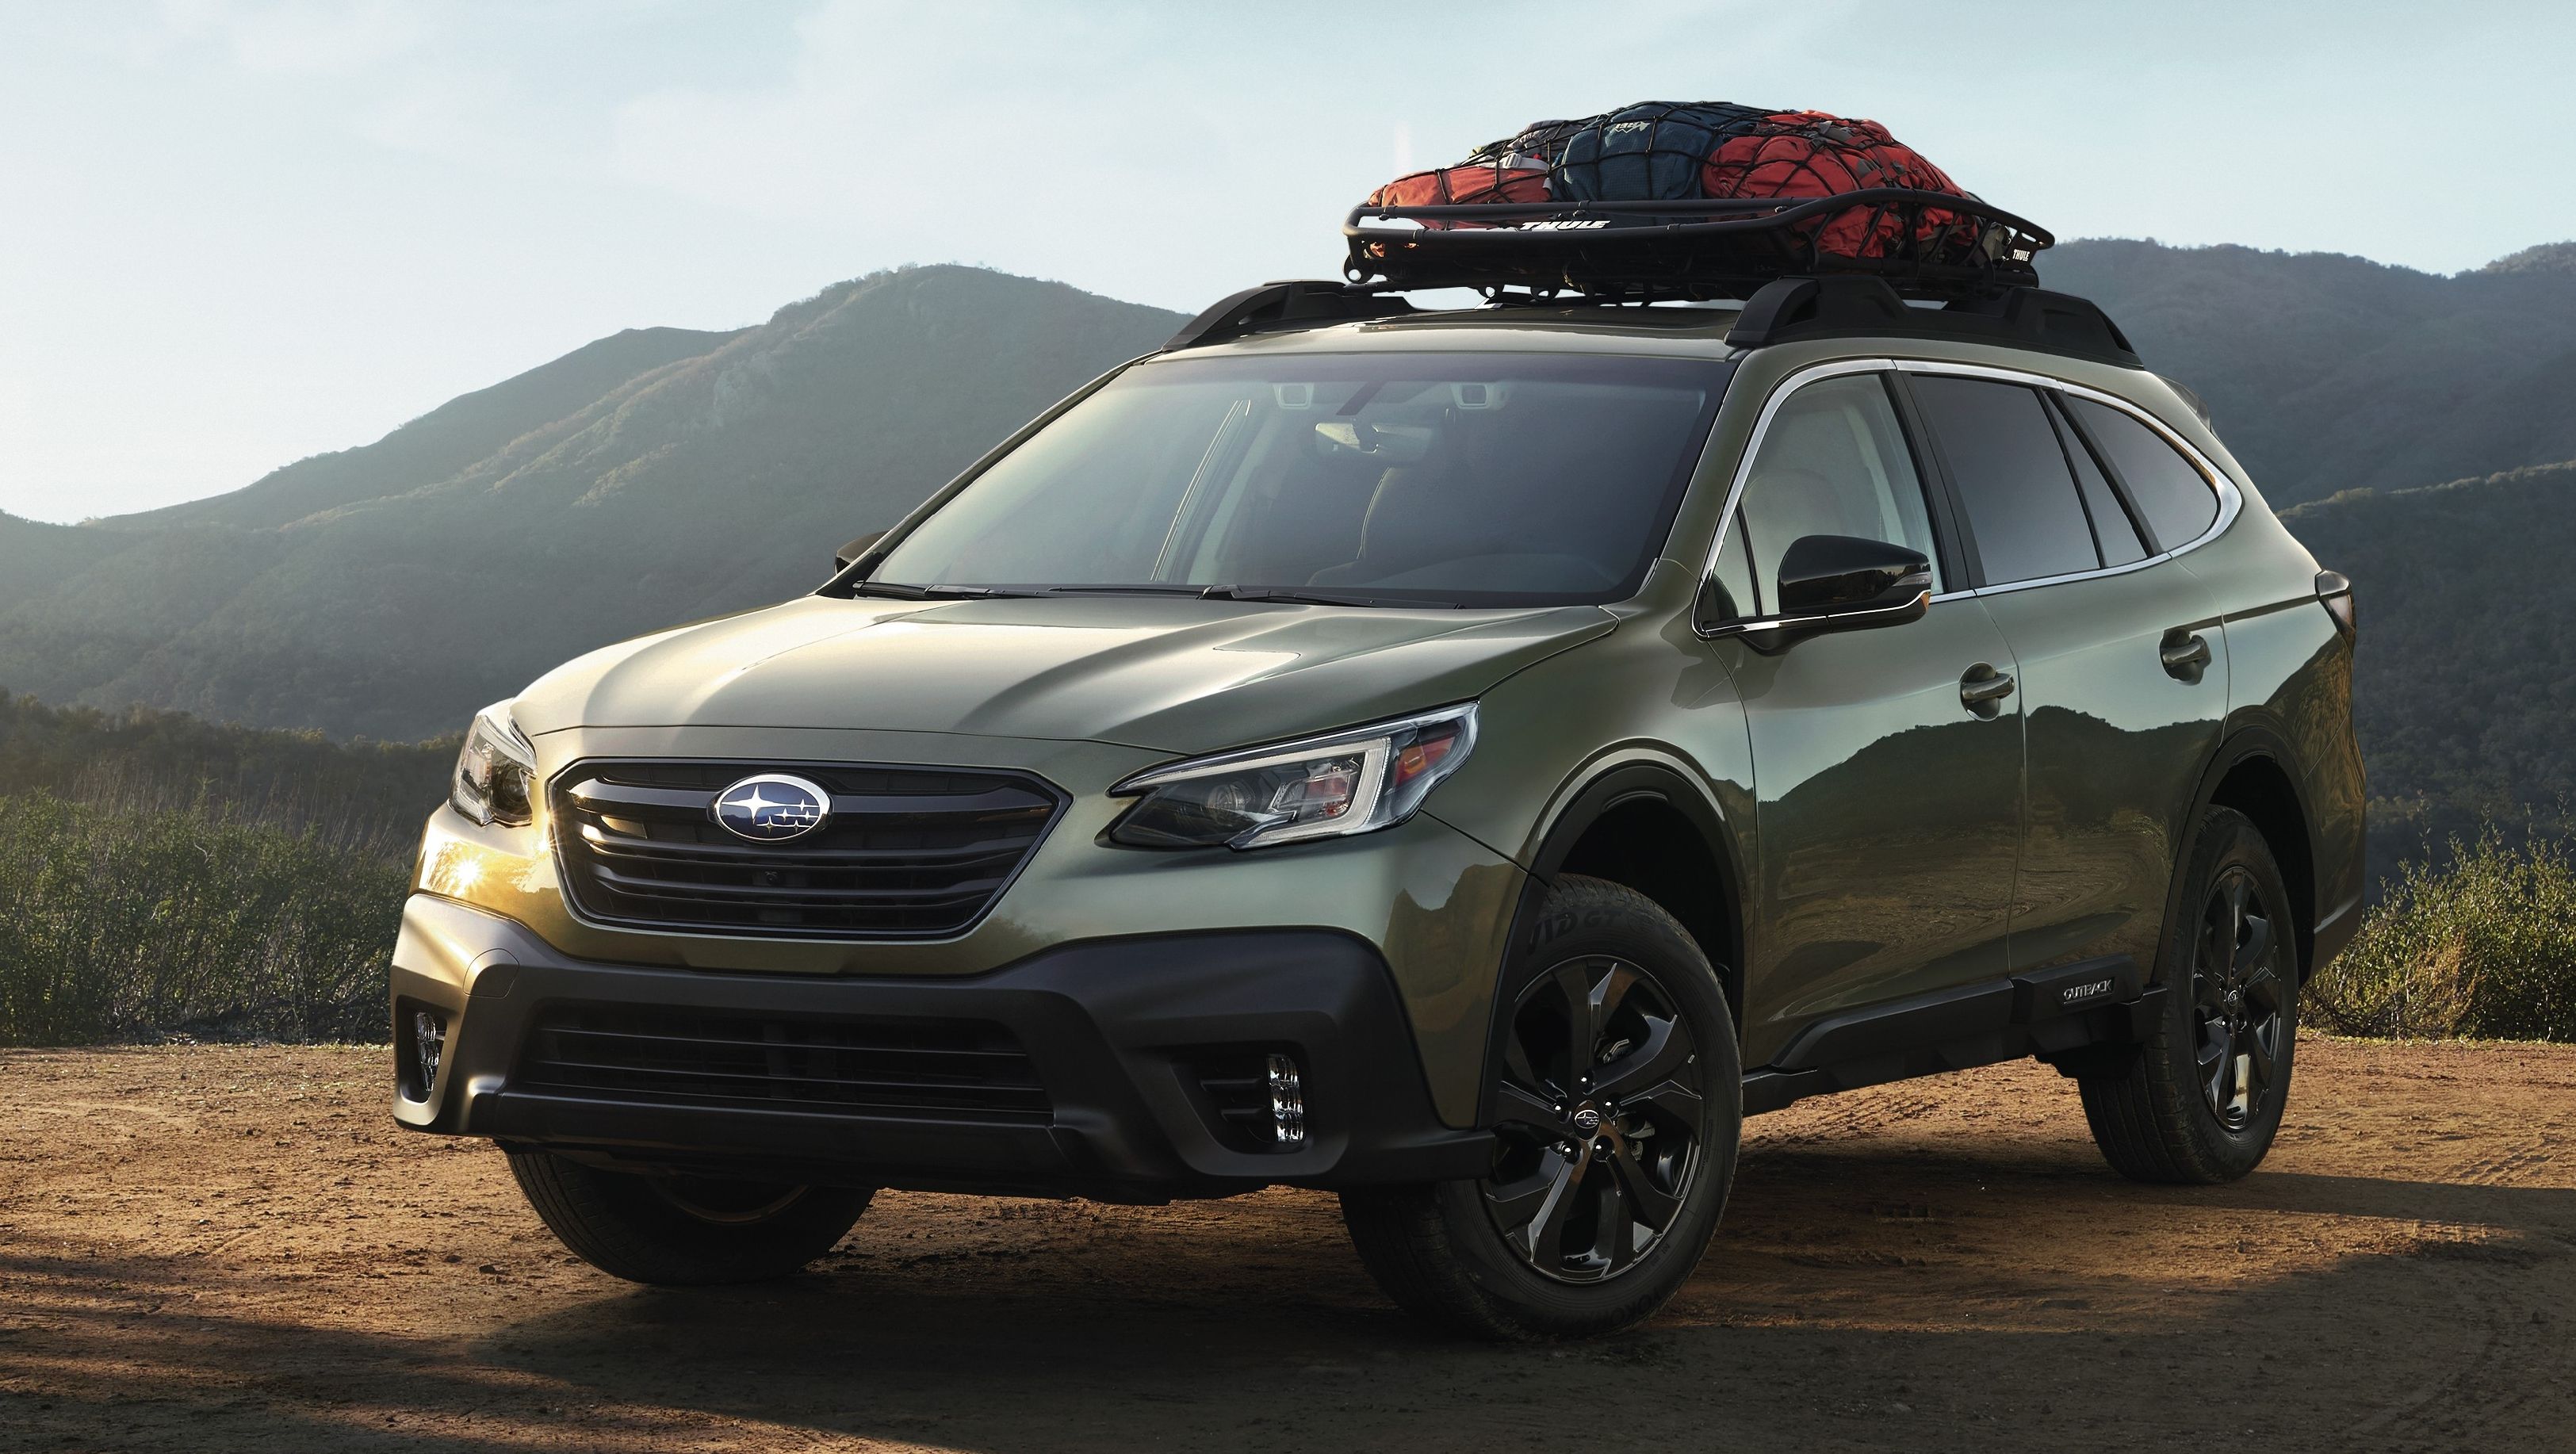 2017 - 2019 2020 Subaru Outback Debuts as the Safest, Most Capable Outback Ever